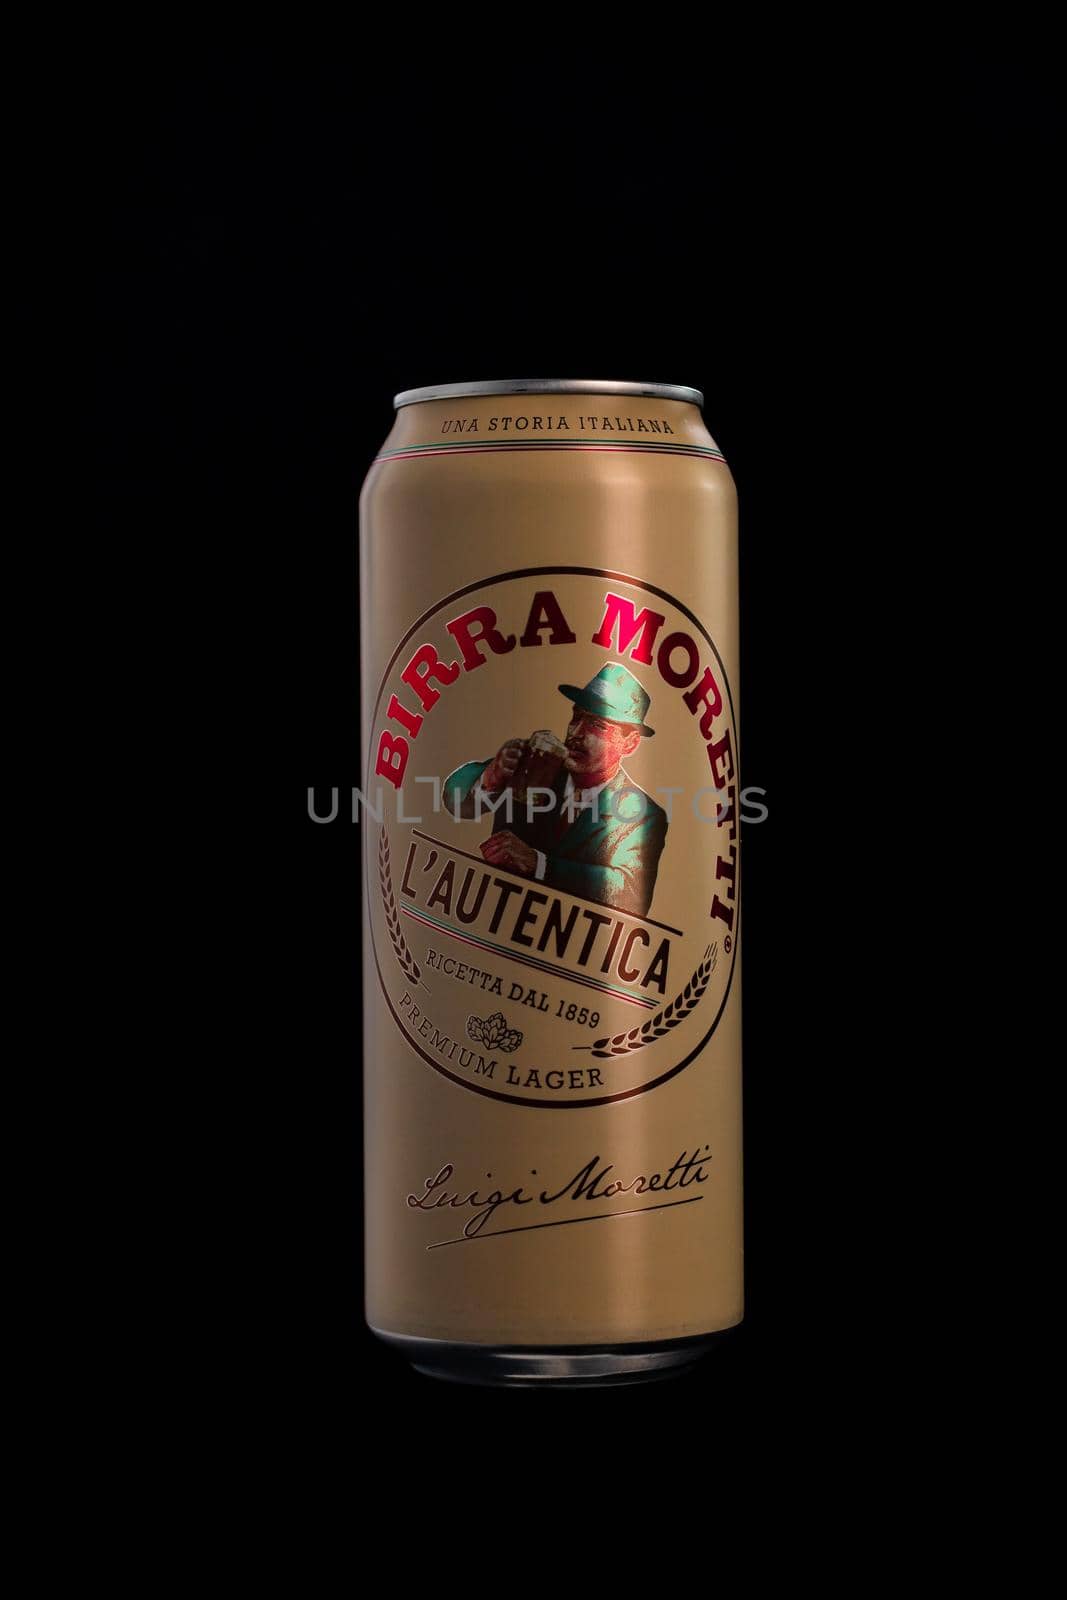 Birra Moretti, a premium lager beer produced by Italian brewing company now owned by Heineken International. Studio photo shoot in Bucharest, Romania, 2021